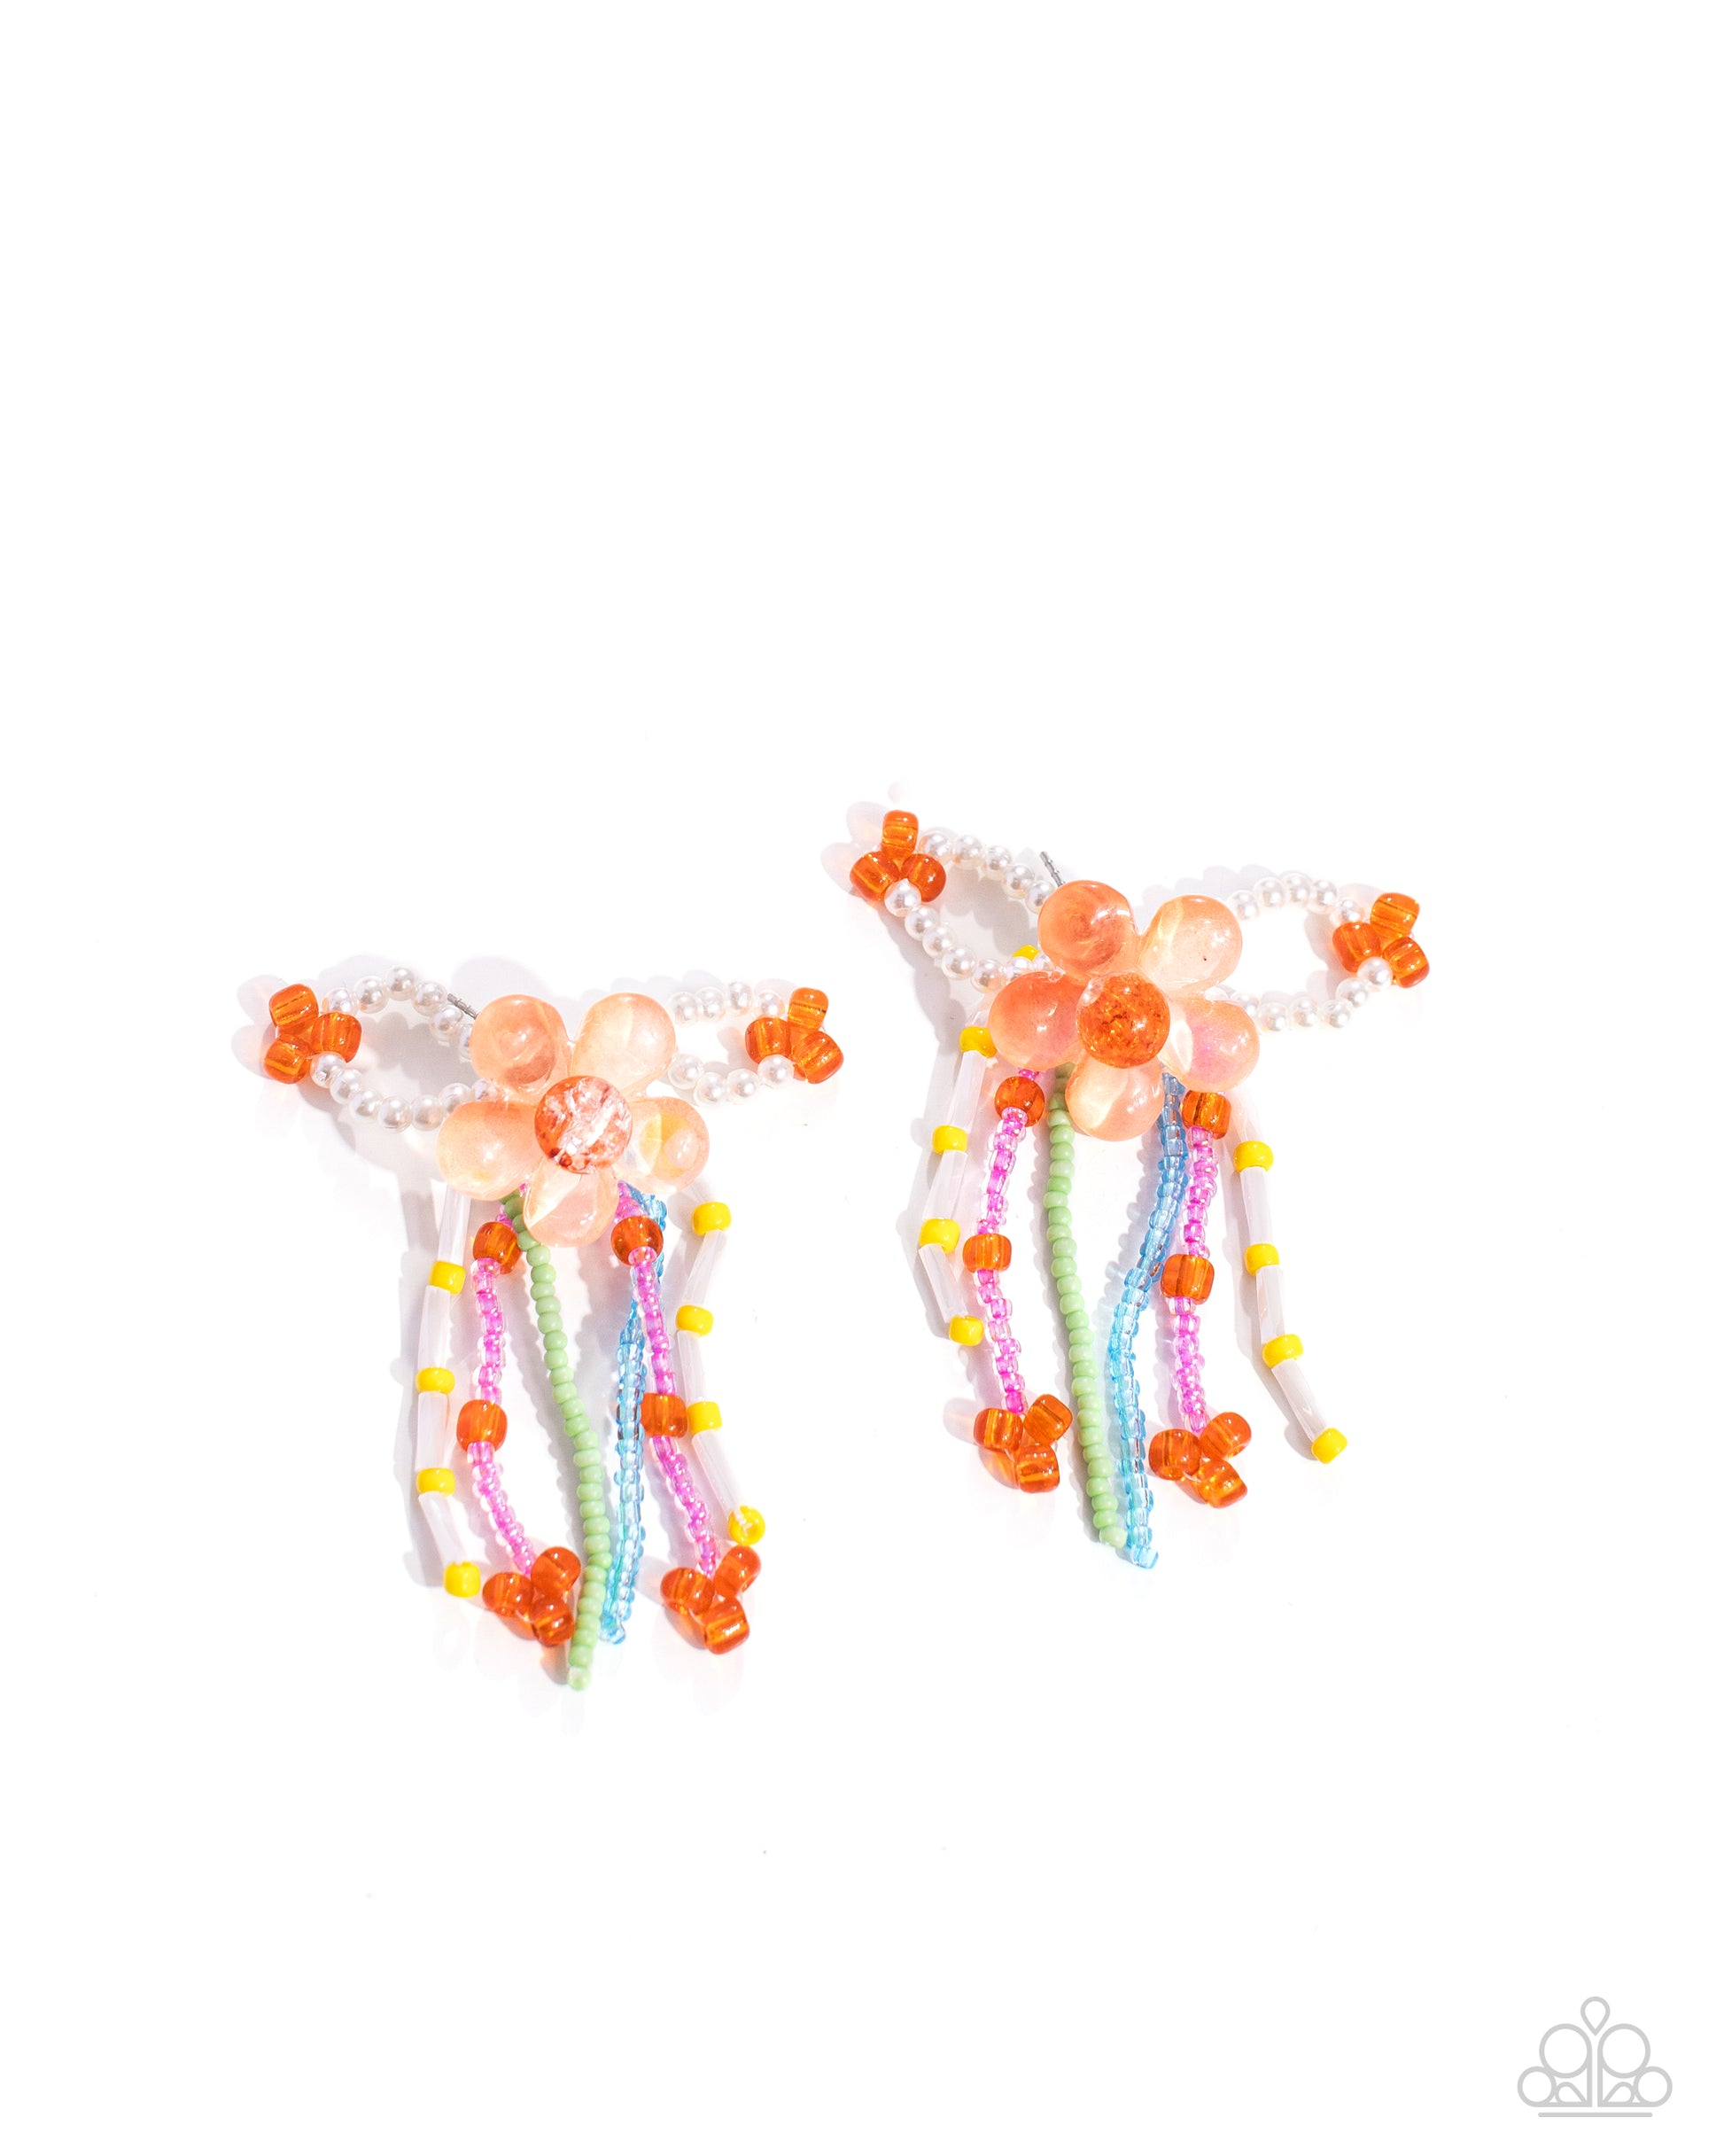 Paparazzi Accessories - Japanese Blossoms - Orange Earrings a&nbsp;frosted orange acrylic flower with a glassy orange center glistens from the ear. Strands of glassy and pearlized turquoise, yellow, apple green, pink, and orange seed beads and white pearls in round and cylindrical shapes flourish from the orange flower, mimicking whimsical vines. Earring attaches to a standard post fitting.  Sold as one pair of post earrings.